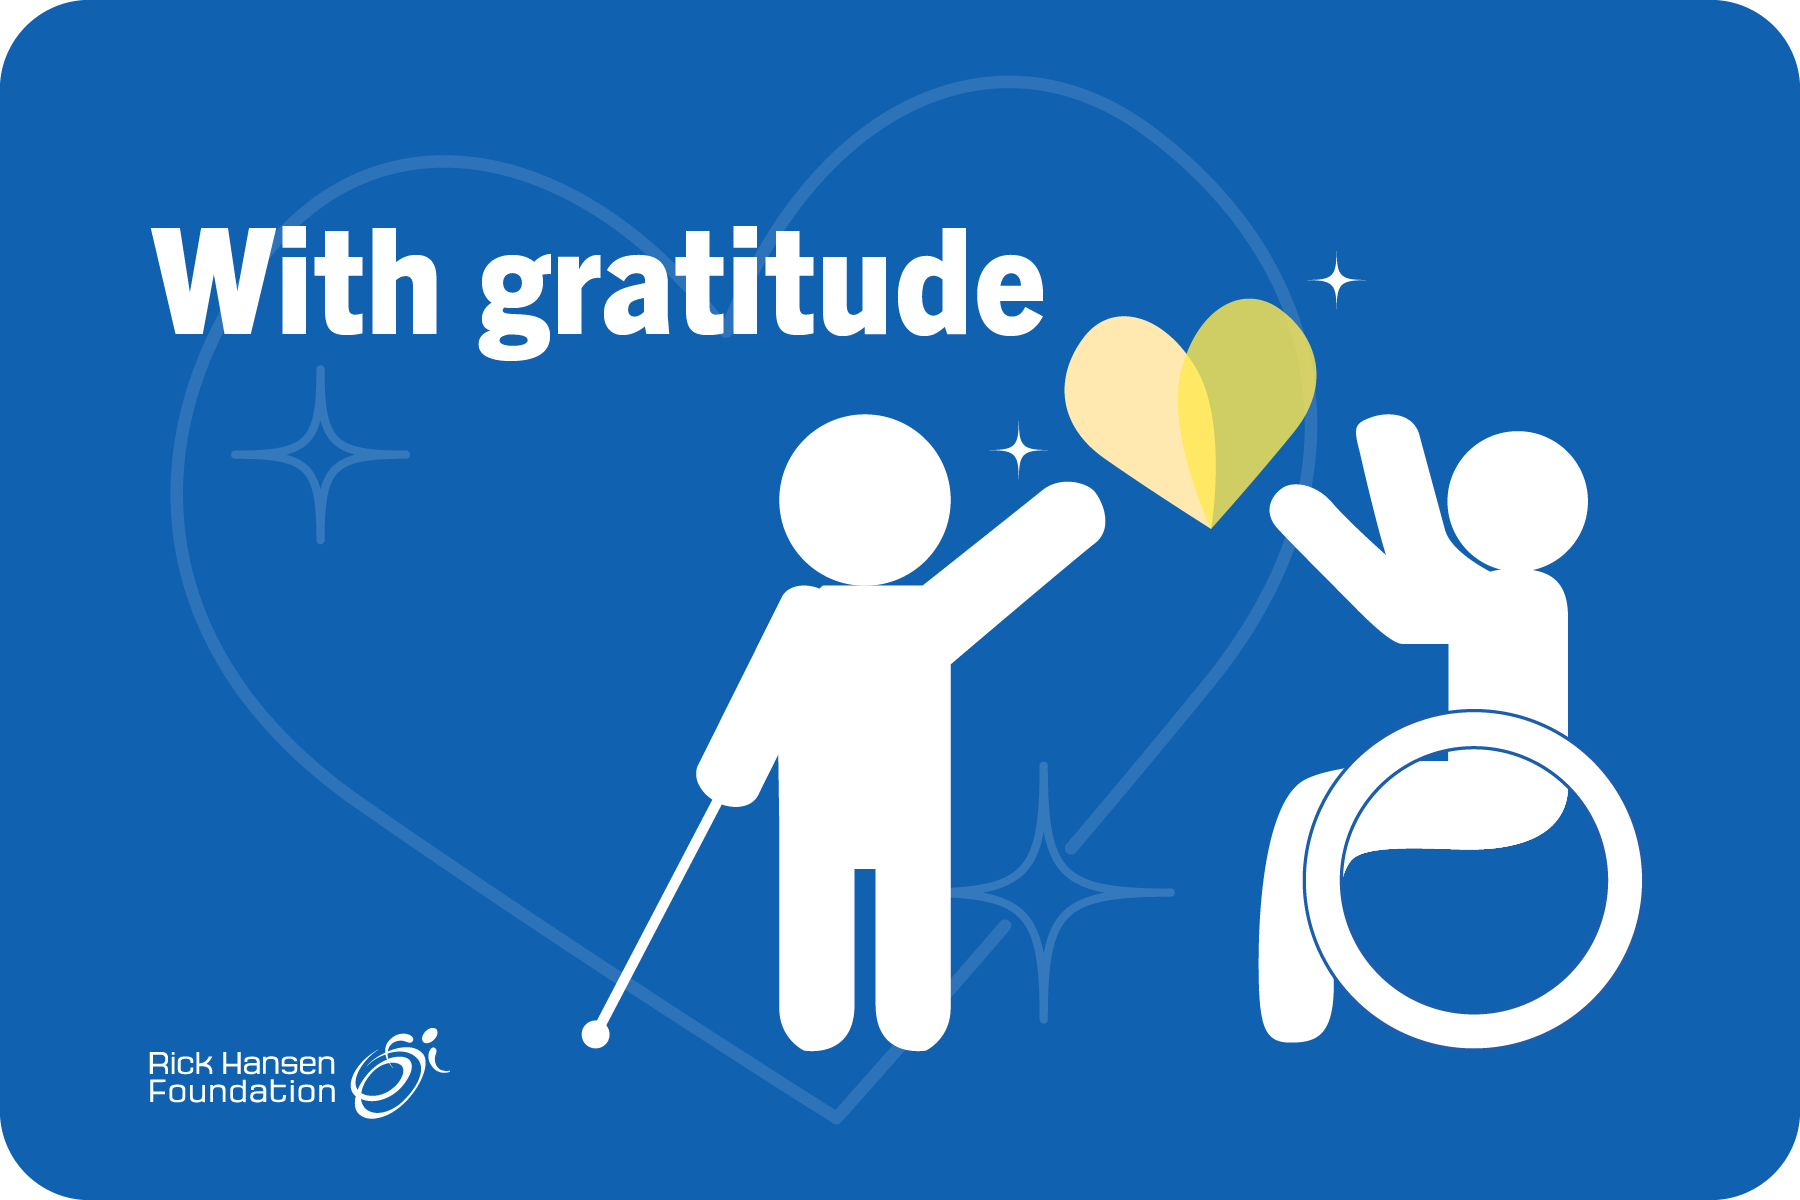 Blue background with a large transparent heart and stars. A white graphic of a person with a cane is passing a yellow heart to a white graphic of a  person using a wheelchair. “With gratitude” is written in white text. The Rick Hansen Foundation logo is in the bottom left corner.